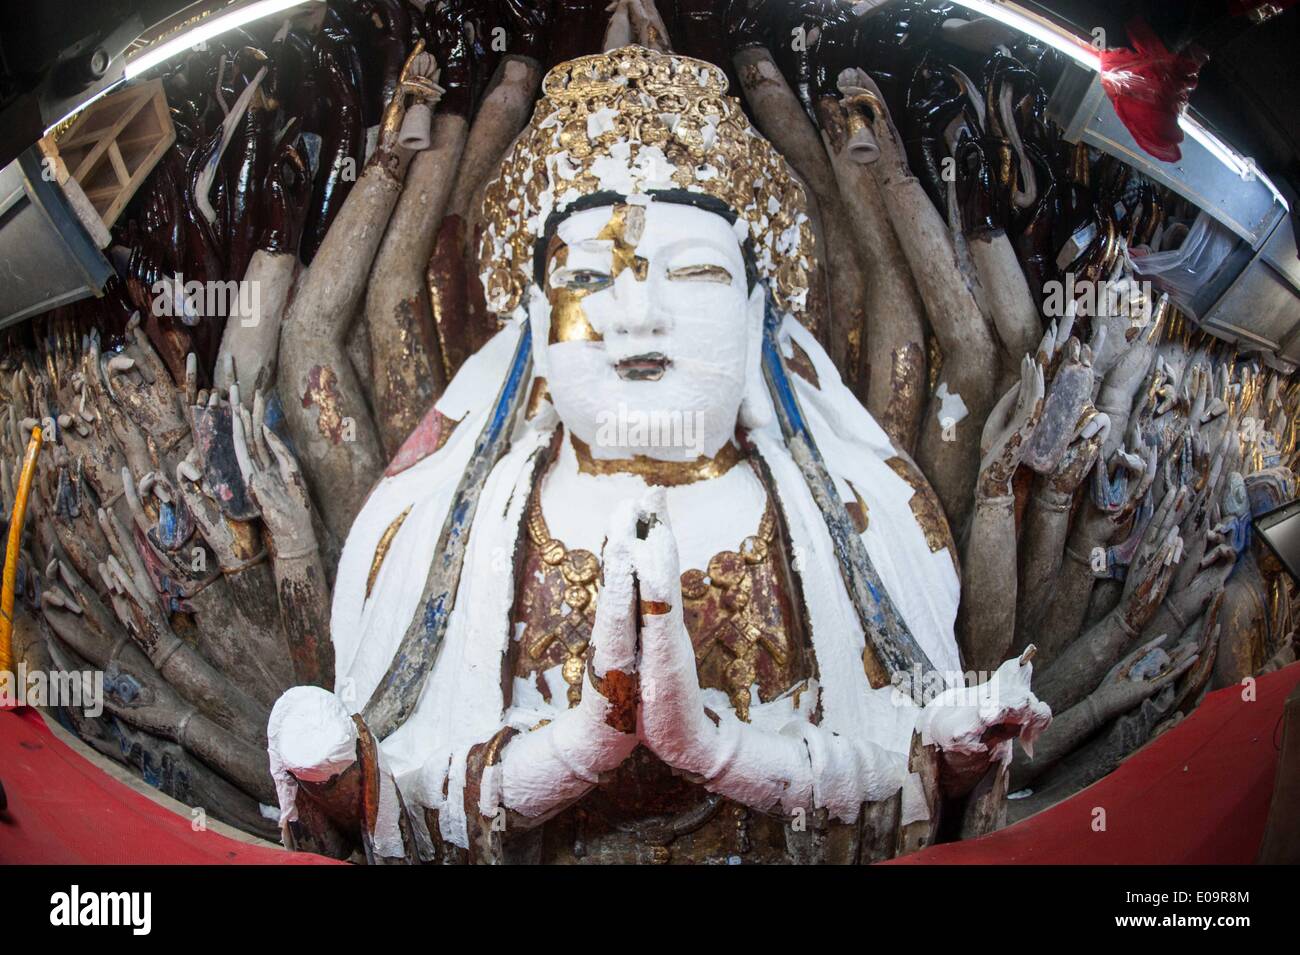 (140507) -- CHONGQING, May 7, 2014 (Xinhua) -- Photo taken on May 7, 2014 shows a sculpture of Qianshou Guanyin (bodhisattva with a thousand hands) on Mount Baoding after restoration in Dazu District in the municipality of Chongqing, southwest China. The sculpture, carved in the cave with 7.7 meters high and 12.5 meters wide, could date back to Southern Song Dynasty (1127 to 1279). Over the centuries, the sculpture's color has faded, parts of the gold foil covering have peeled off, and cracks have appeared. And thus, a restoration project for the Buddhist statue has been launched since April 1 Stock Photo